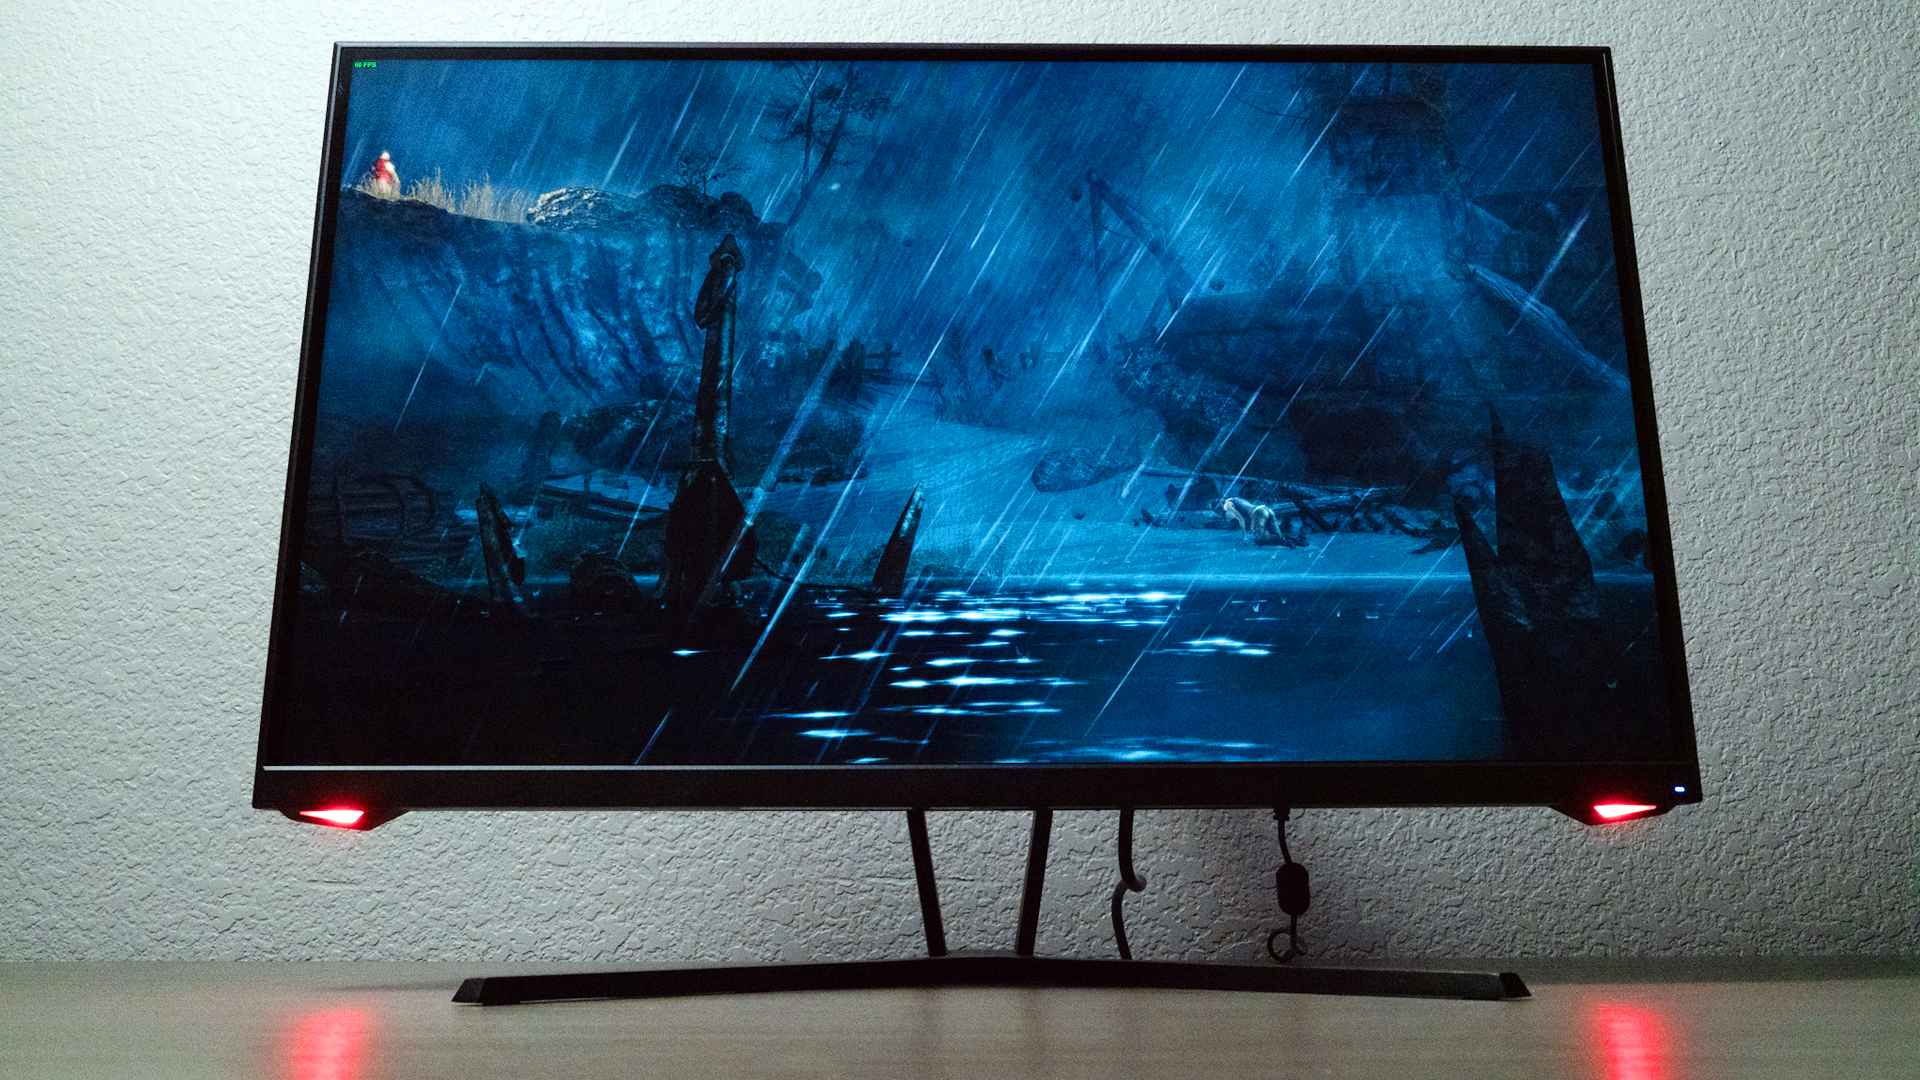 Dark Matter monitor while playing a video game, with the front LED lights reflecting off table